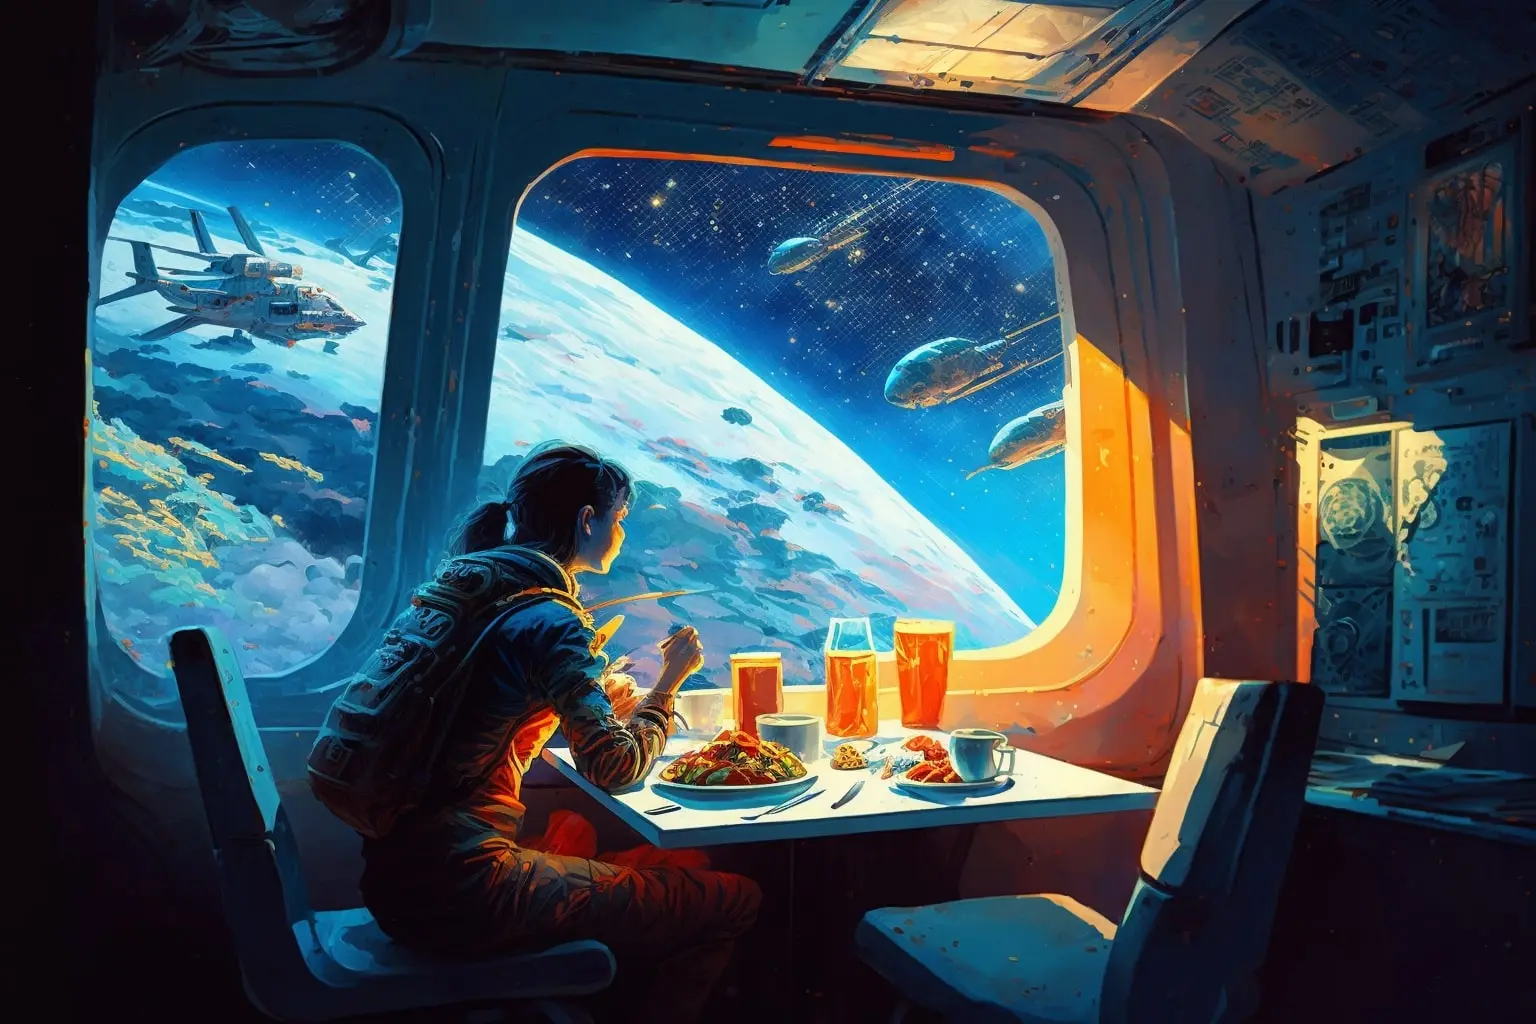 Eating in the Spaceship Illustration